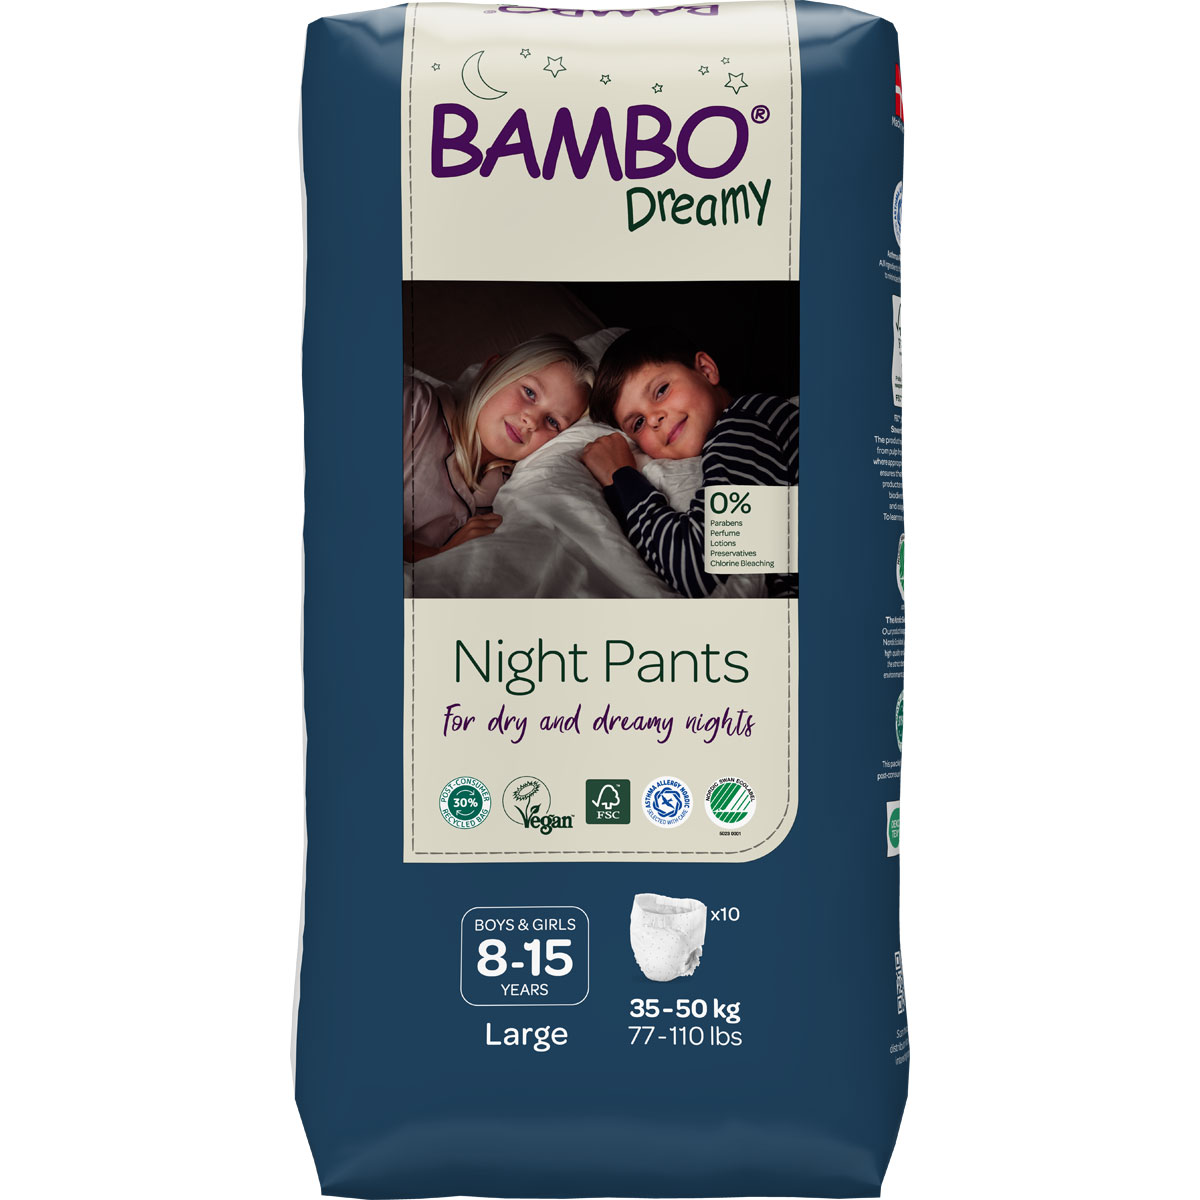 Bambo Dreamy - Night Pants unisex - 8 bis 15 Jahre (35-50 kg) - 10 St. Pack